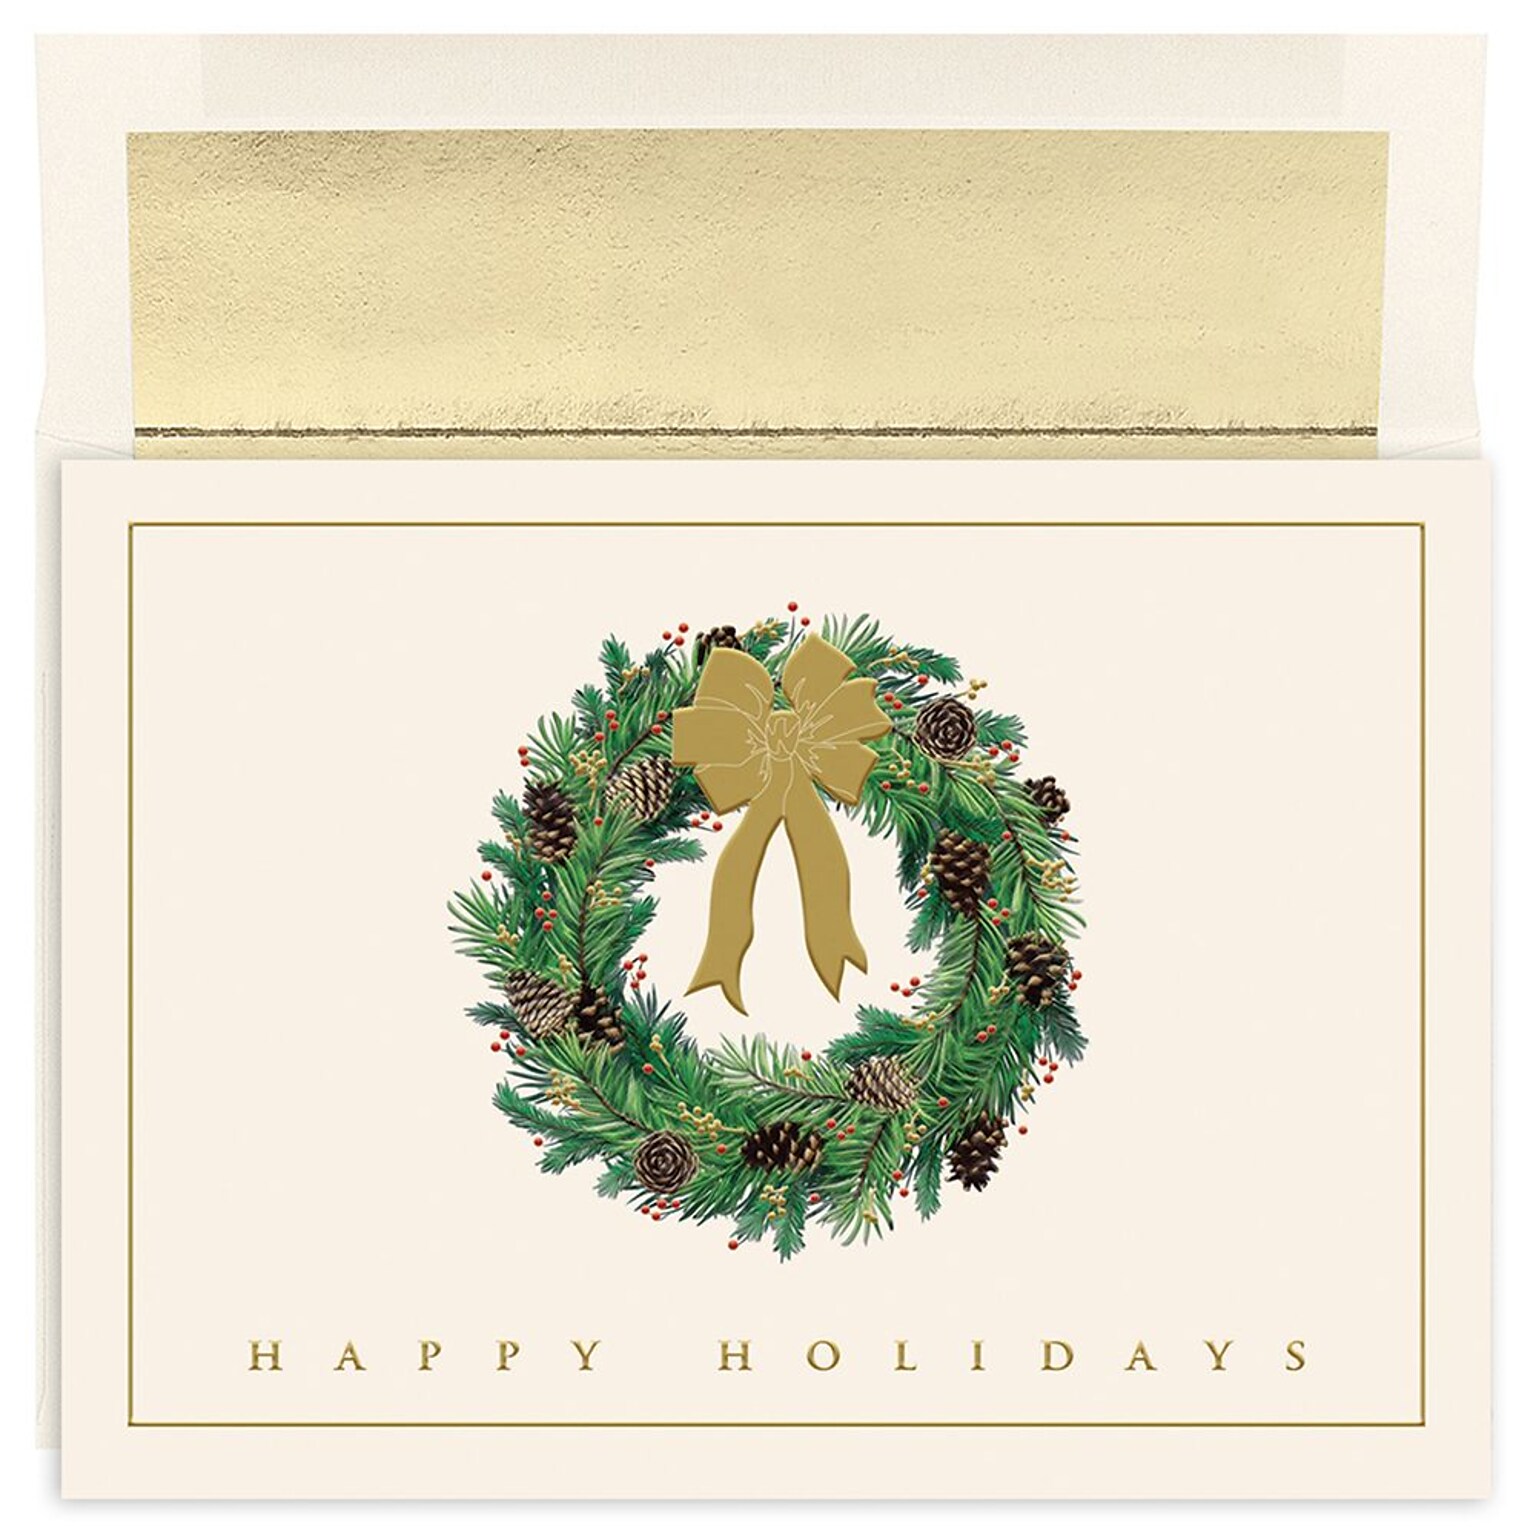 Great Papers! Holiday Greeting Cards, Festive Wreath, 7.875 x 5.625, 16/Pack (899900)